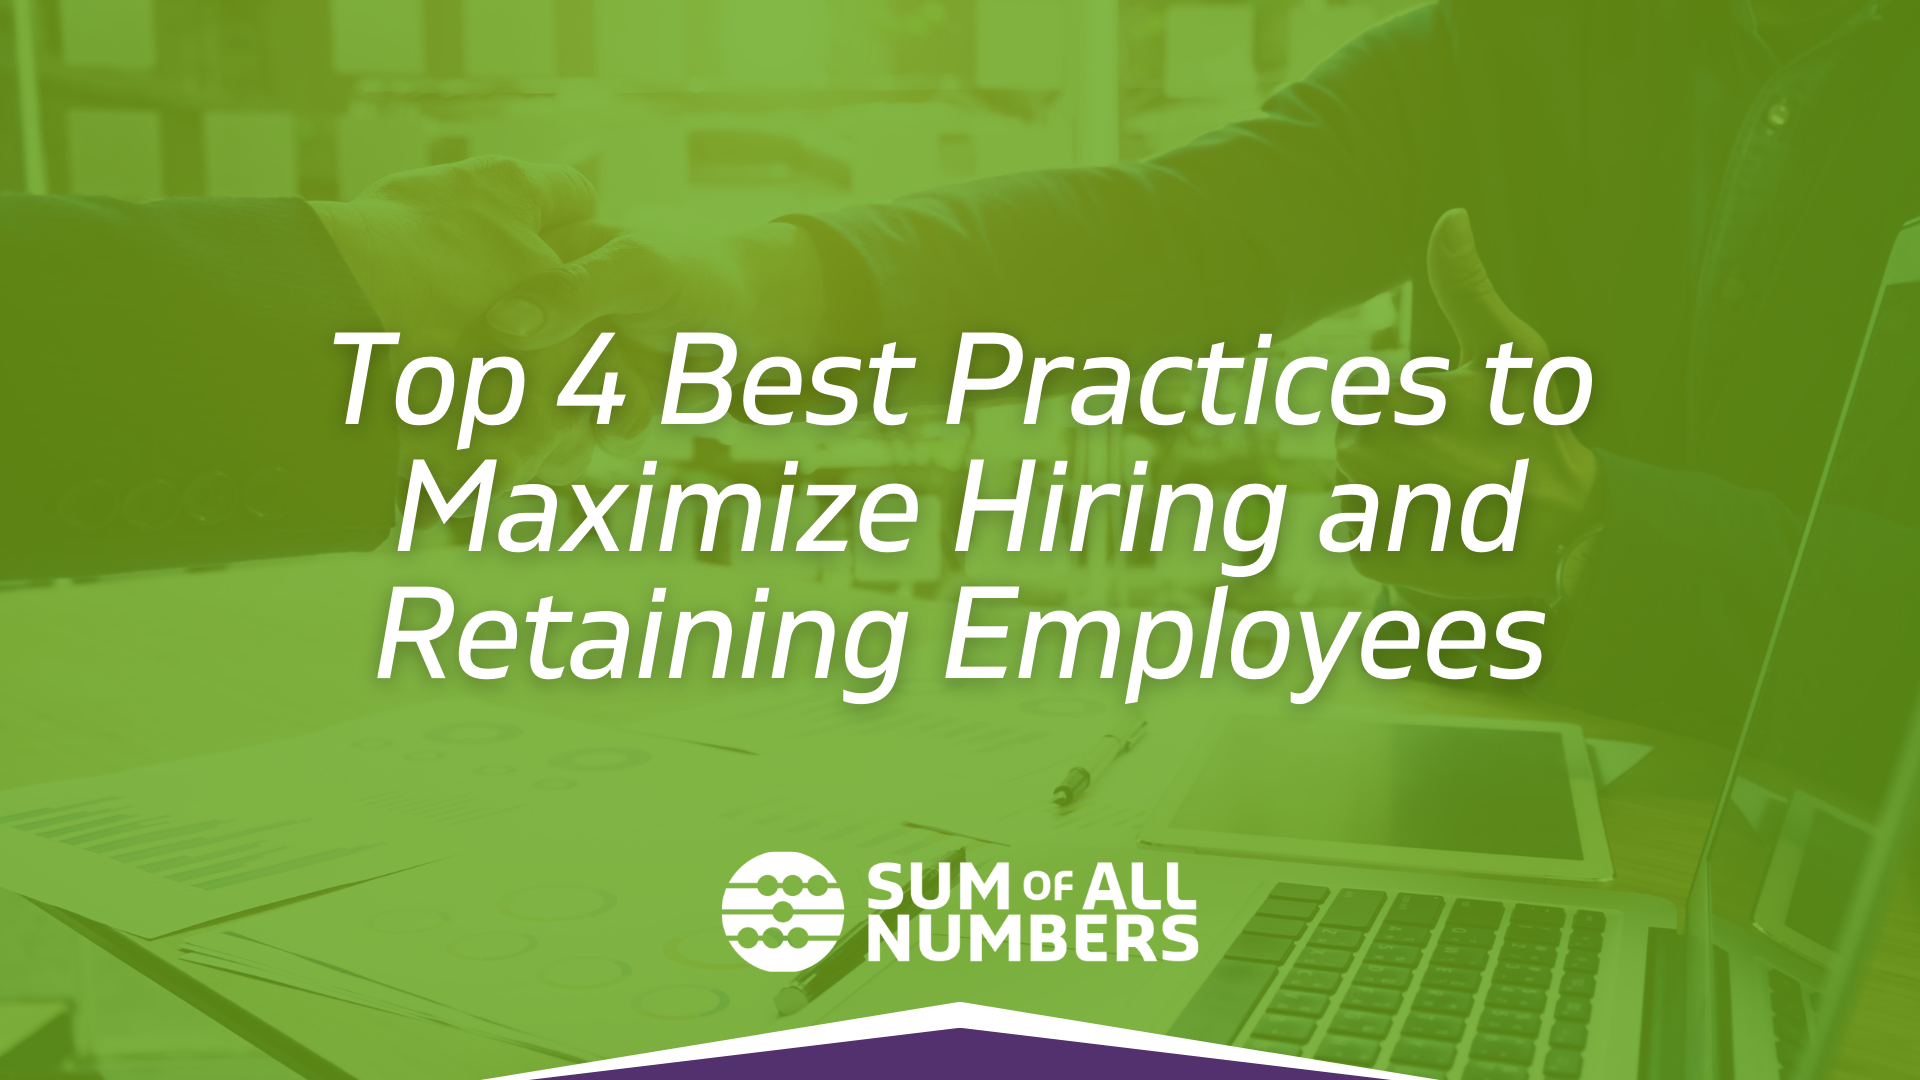 Top 4 Best Practices to Maximize Hiring and Retaining Employees